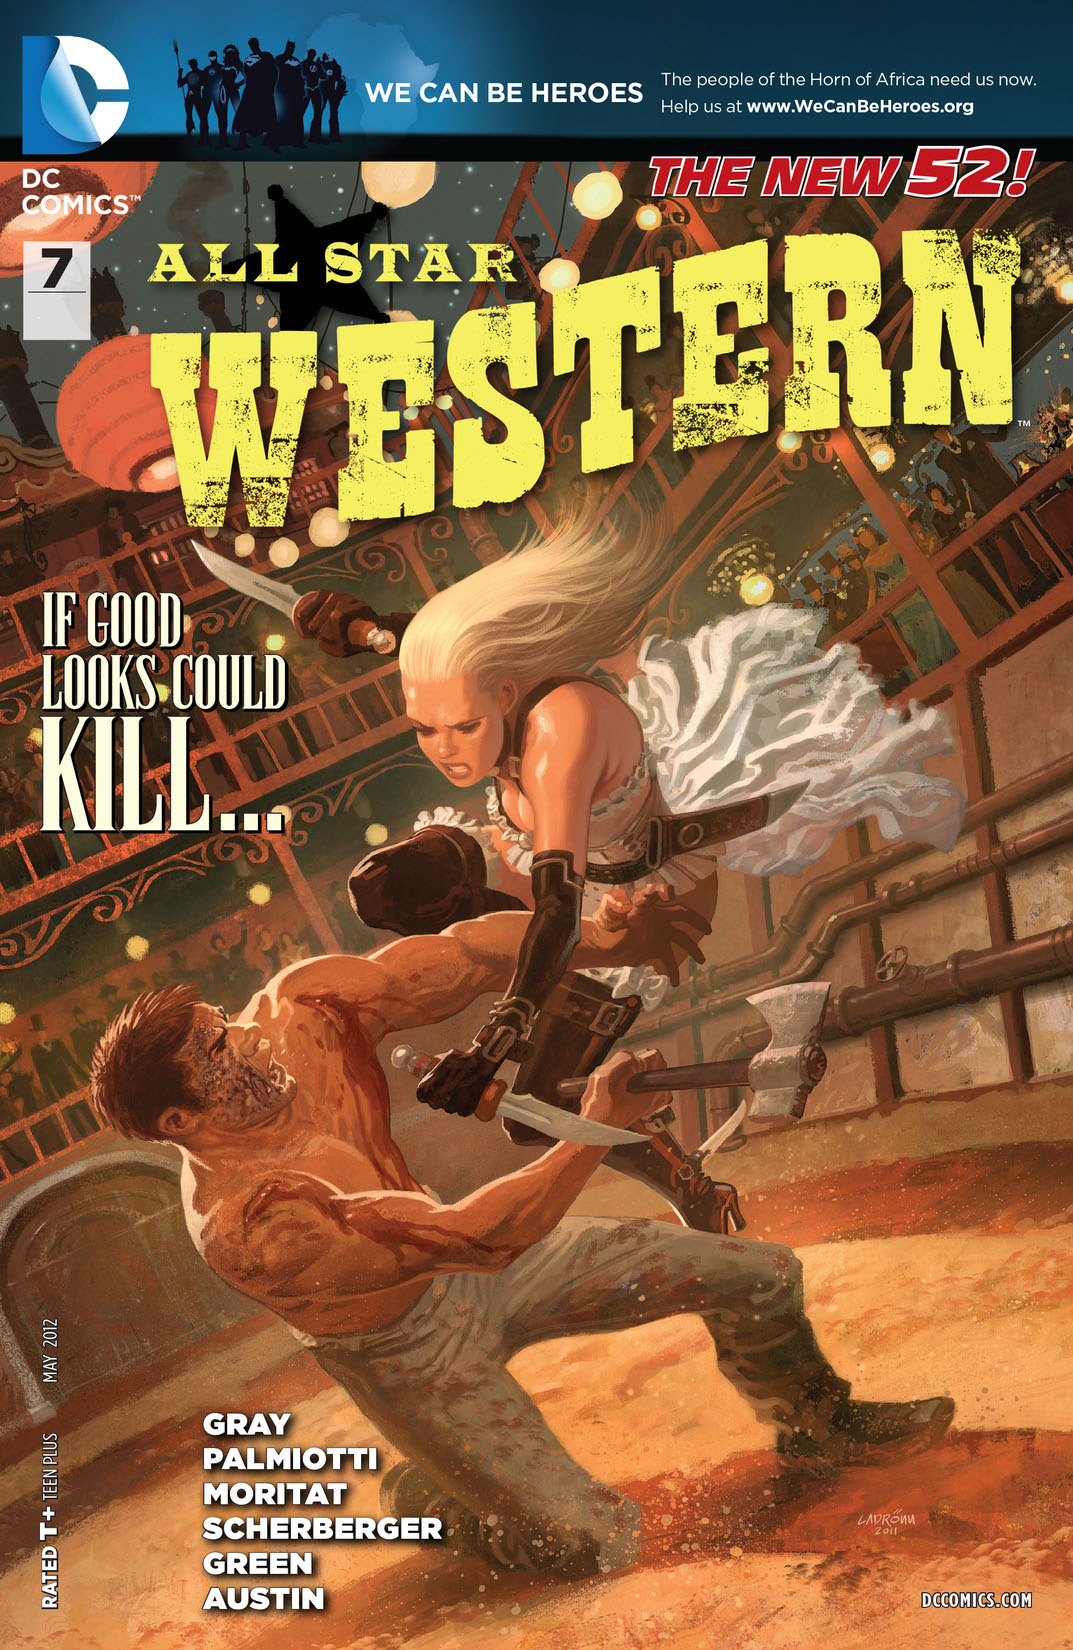 All Star Western #7 preview images